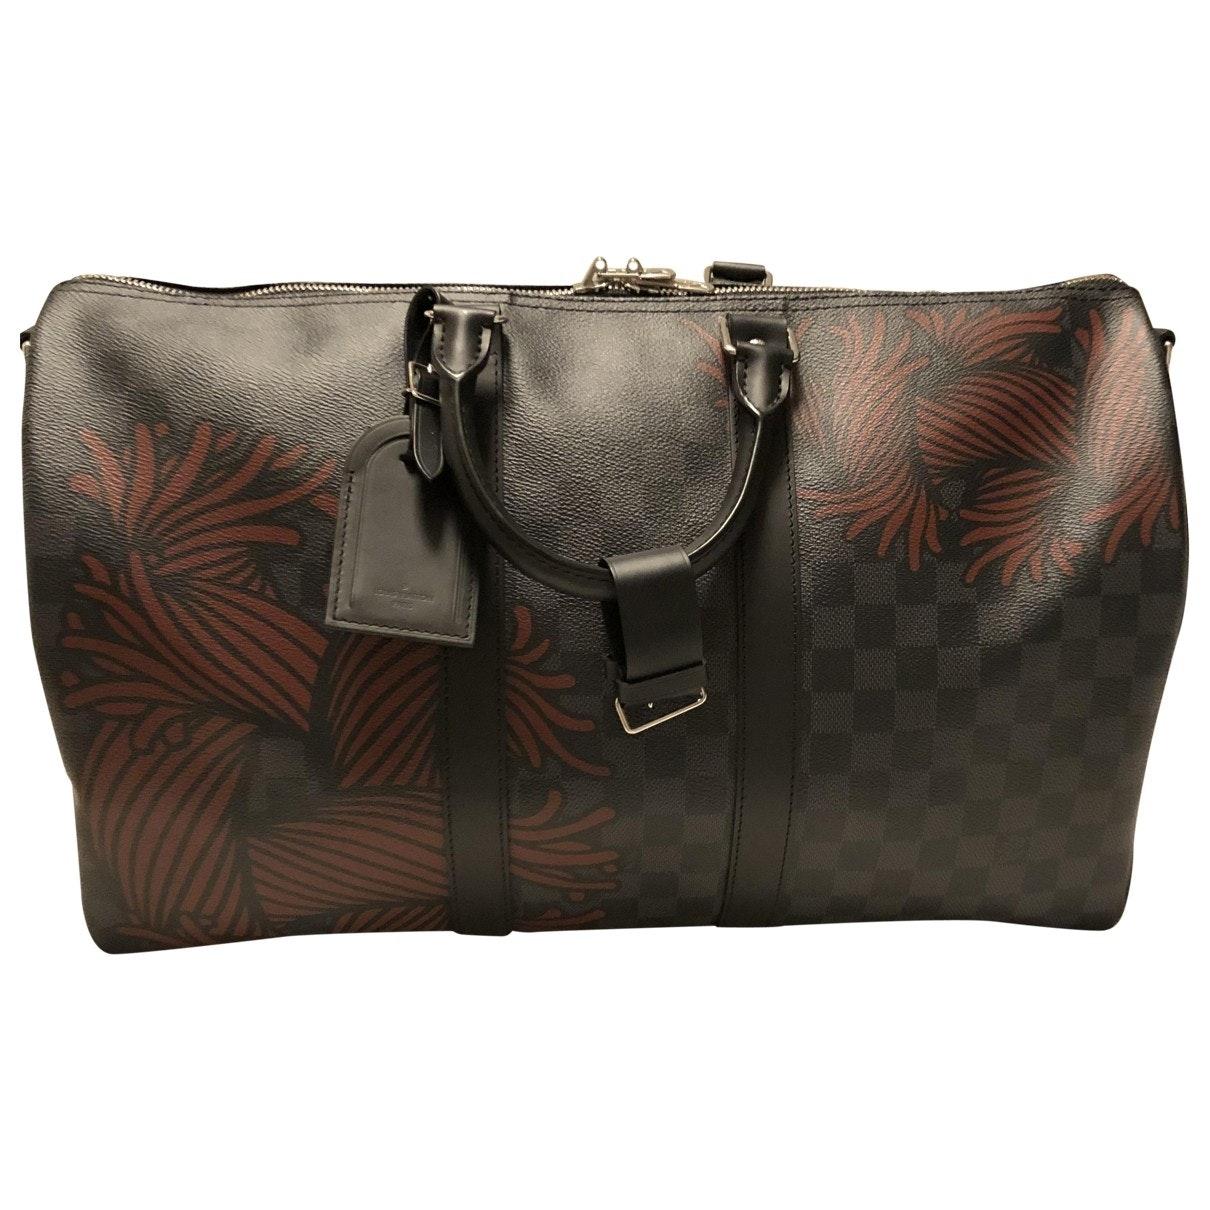 Louis Vuitton Keepall Cloth Travel Bag in Grey (Gray) for Men - Lyst